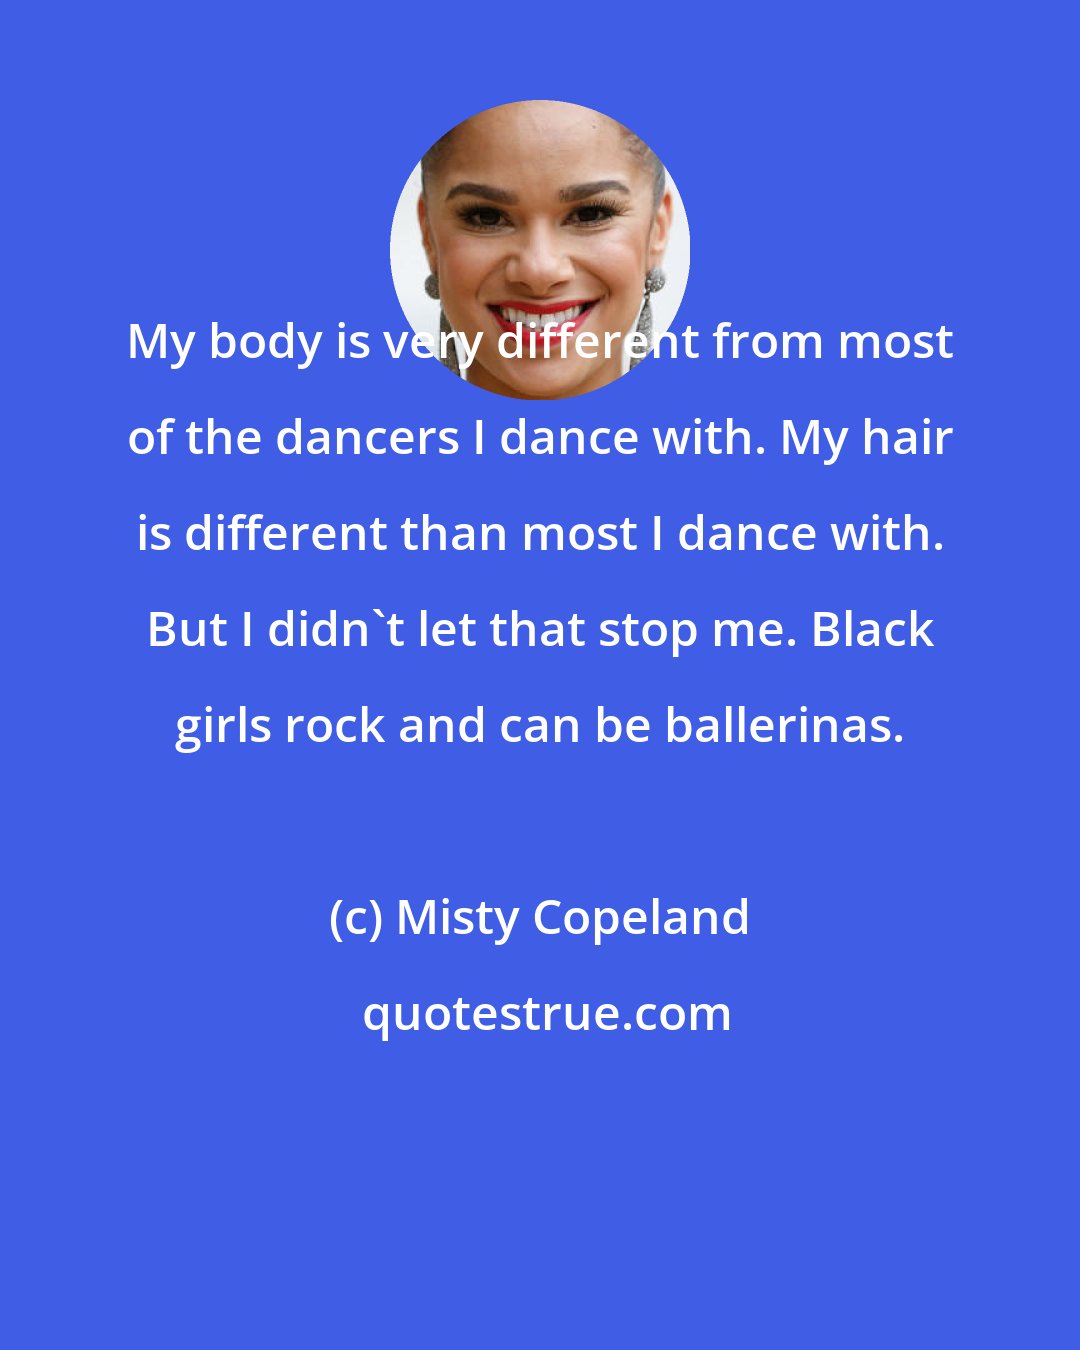 Misty Copeland: My body is very different from most of the dancers I dance with. My hair is different than most I dance with. But I didn't let that stop me. Black girls rock and can be ballerinas.